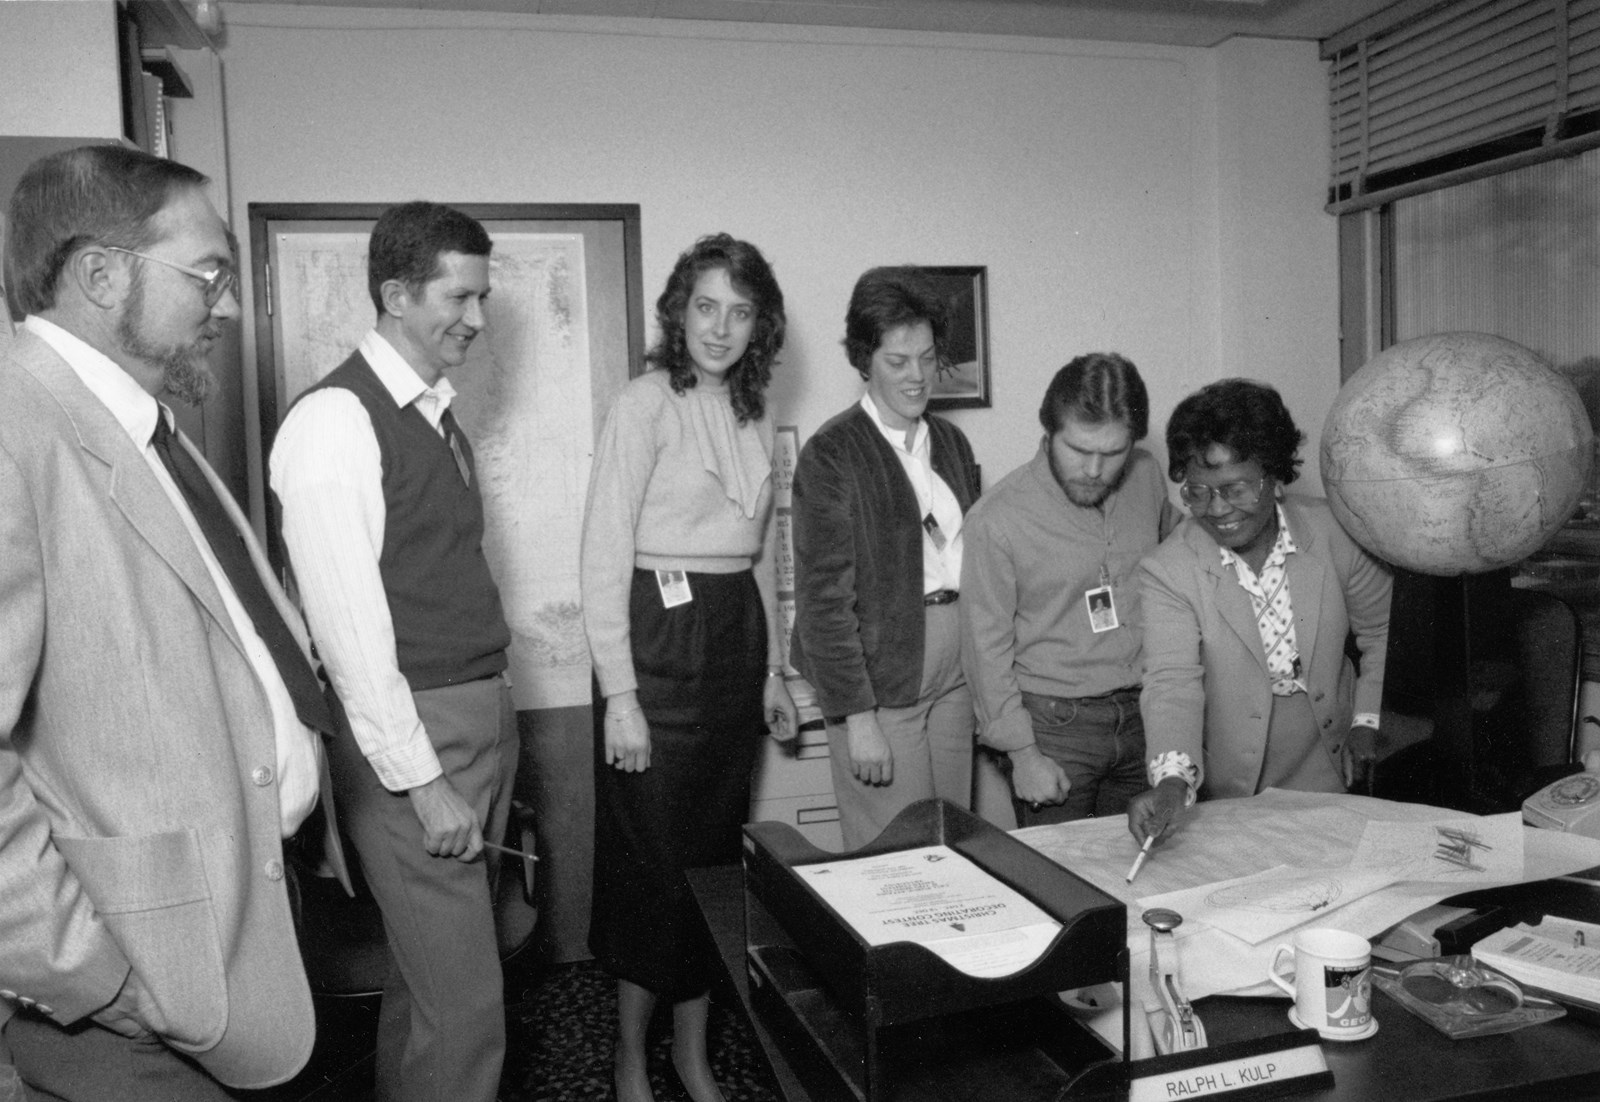 Dr-Gladys-West-(far-right)-and-colleagues-working-on-satellite-geodesy-at-Dahlgren-in-the-1980s-US-Navy